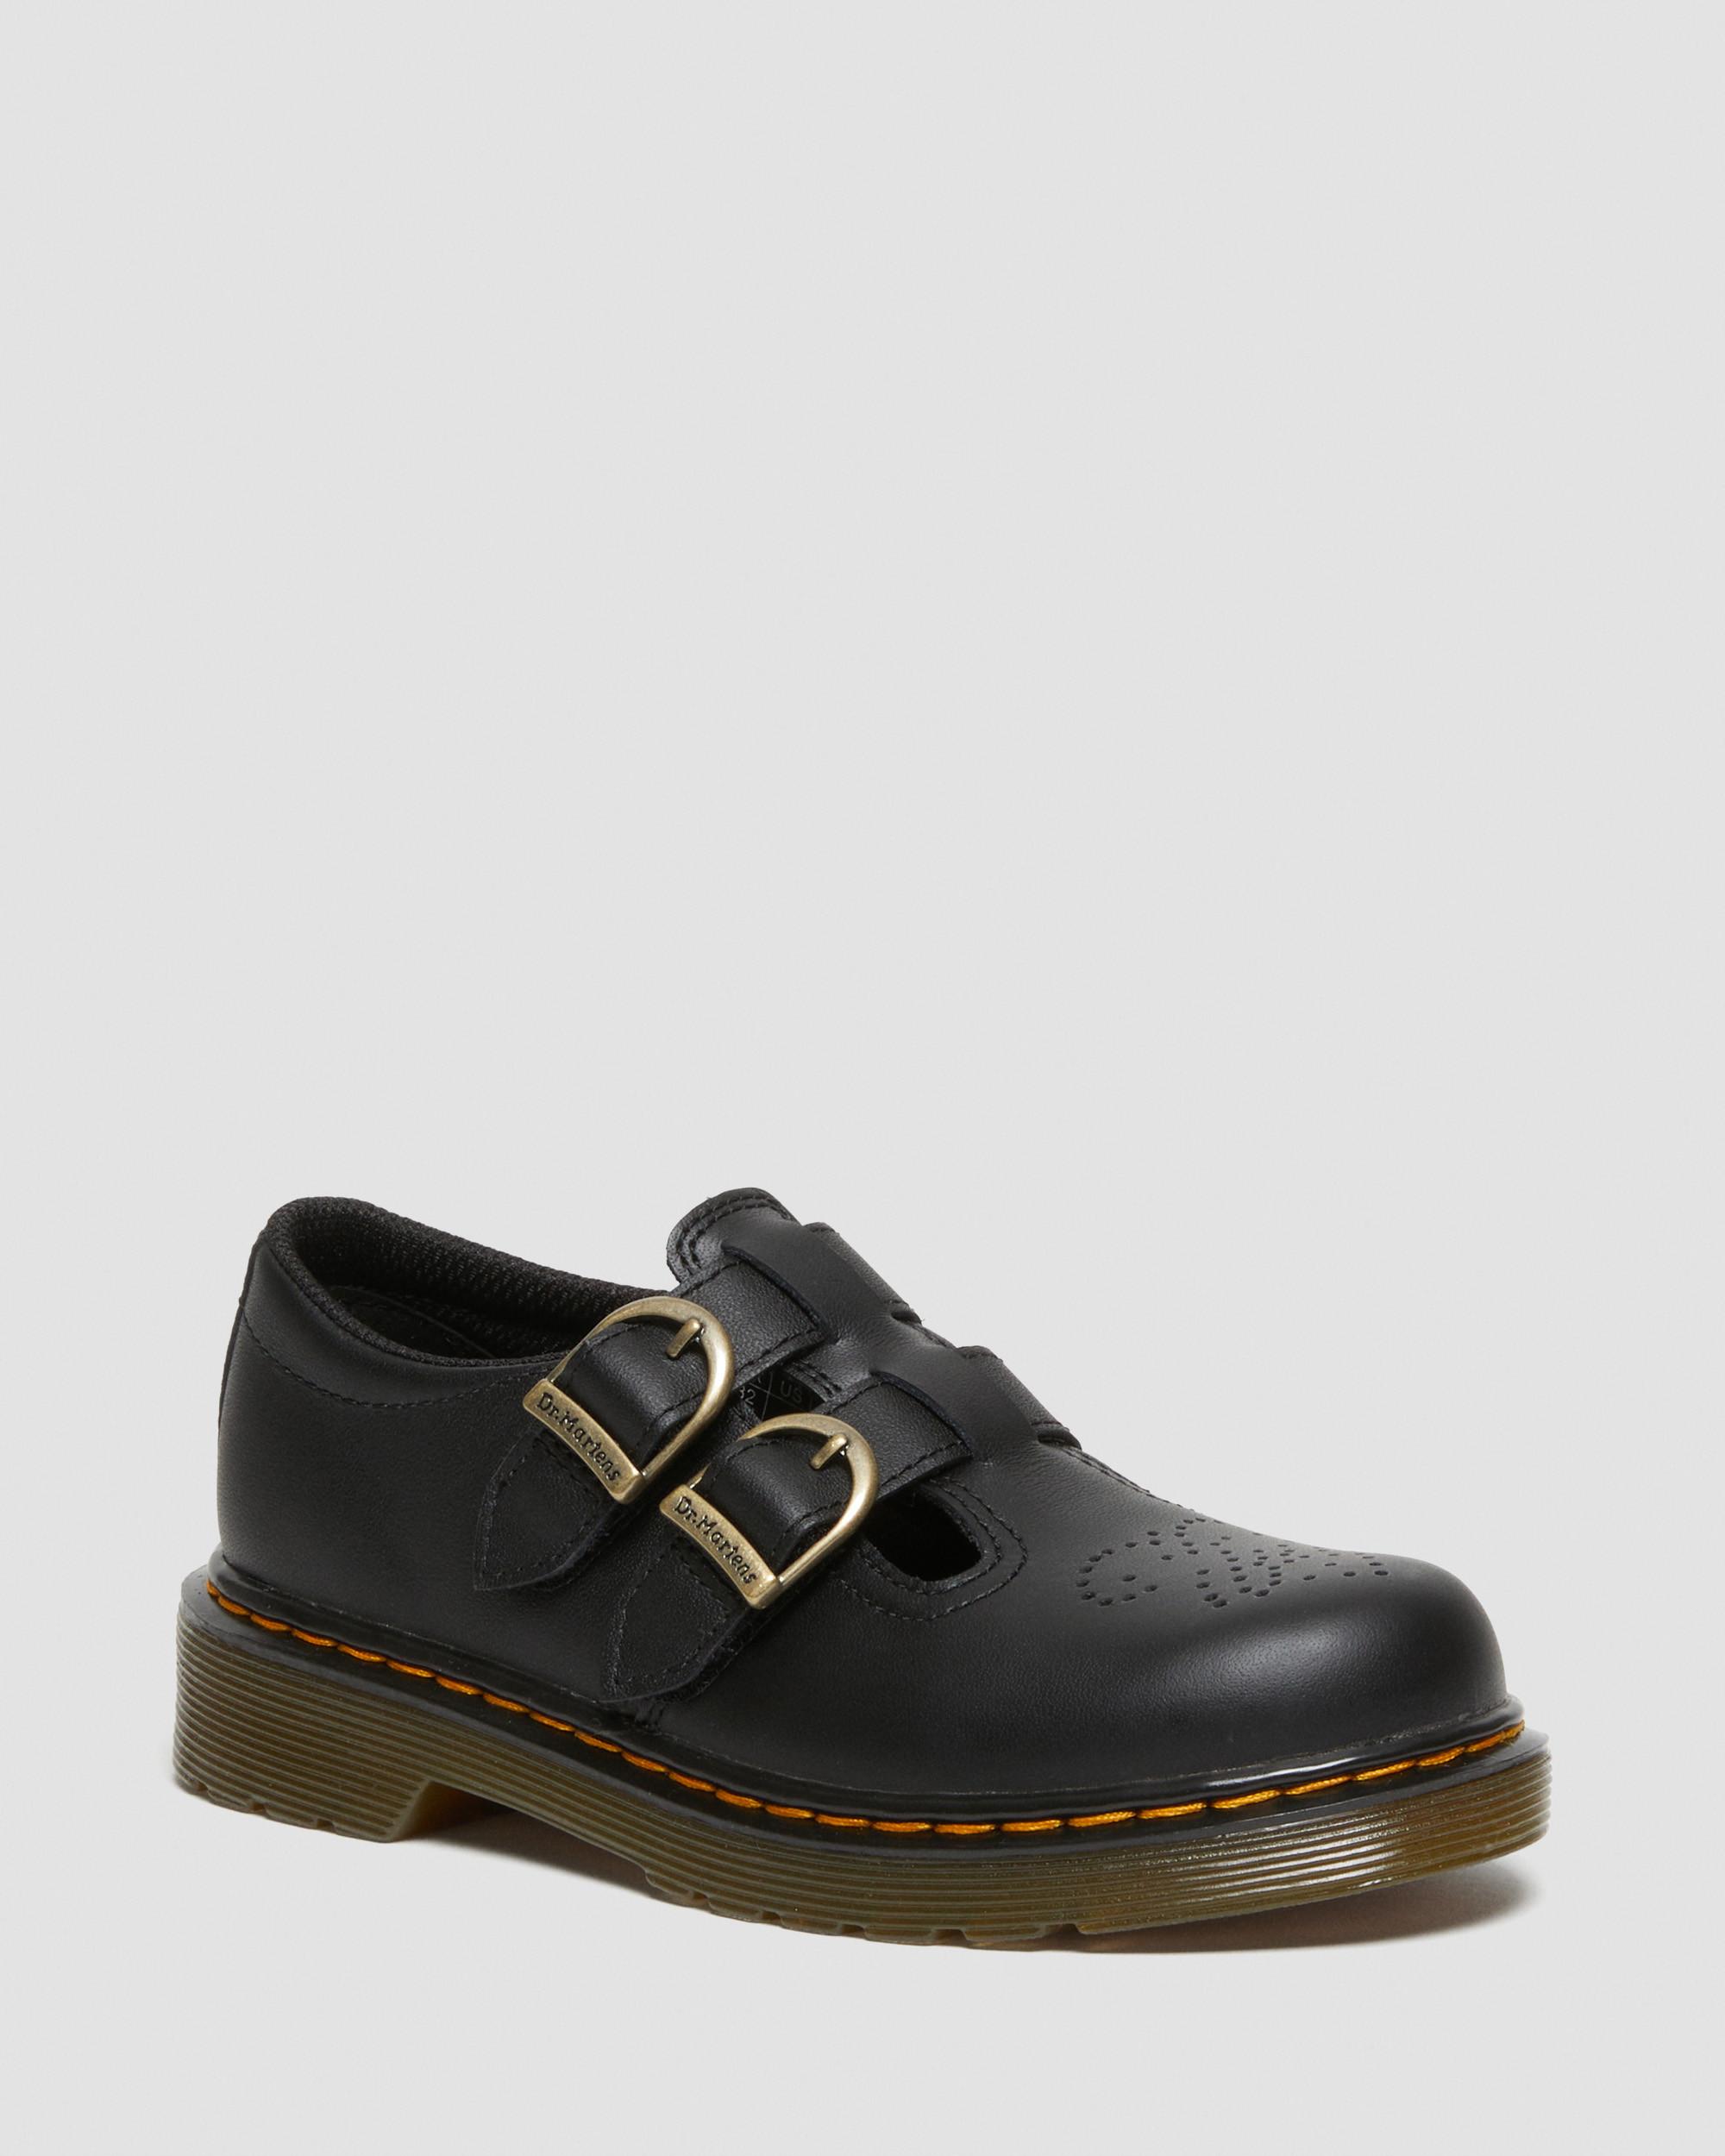 Junior 8065 Softy T Leather Mary Jane Shoes in Black | Dr. Martens